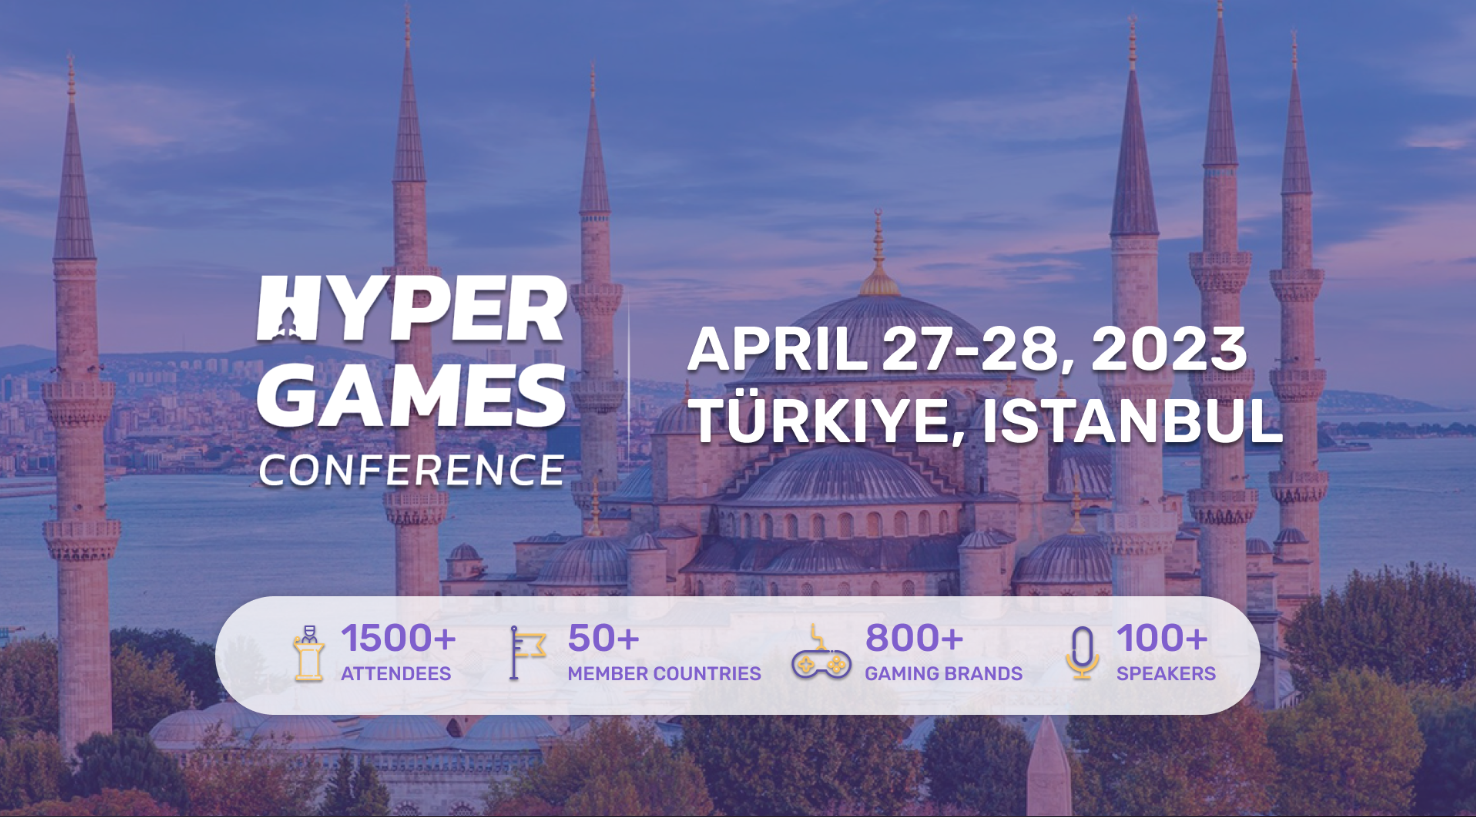 Hyper Games Conference, Istanbul